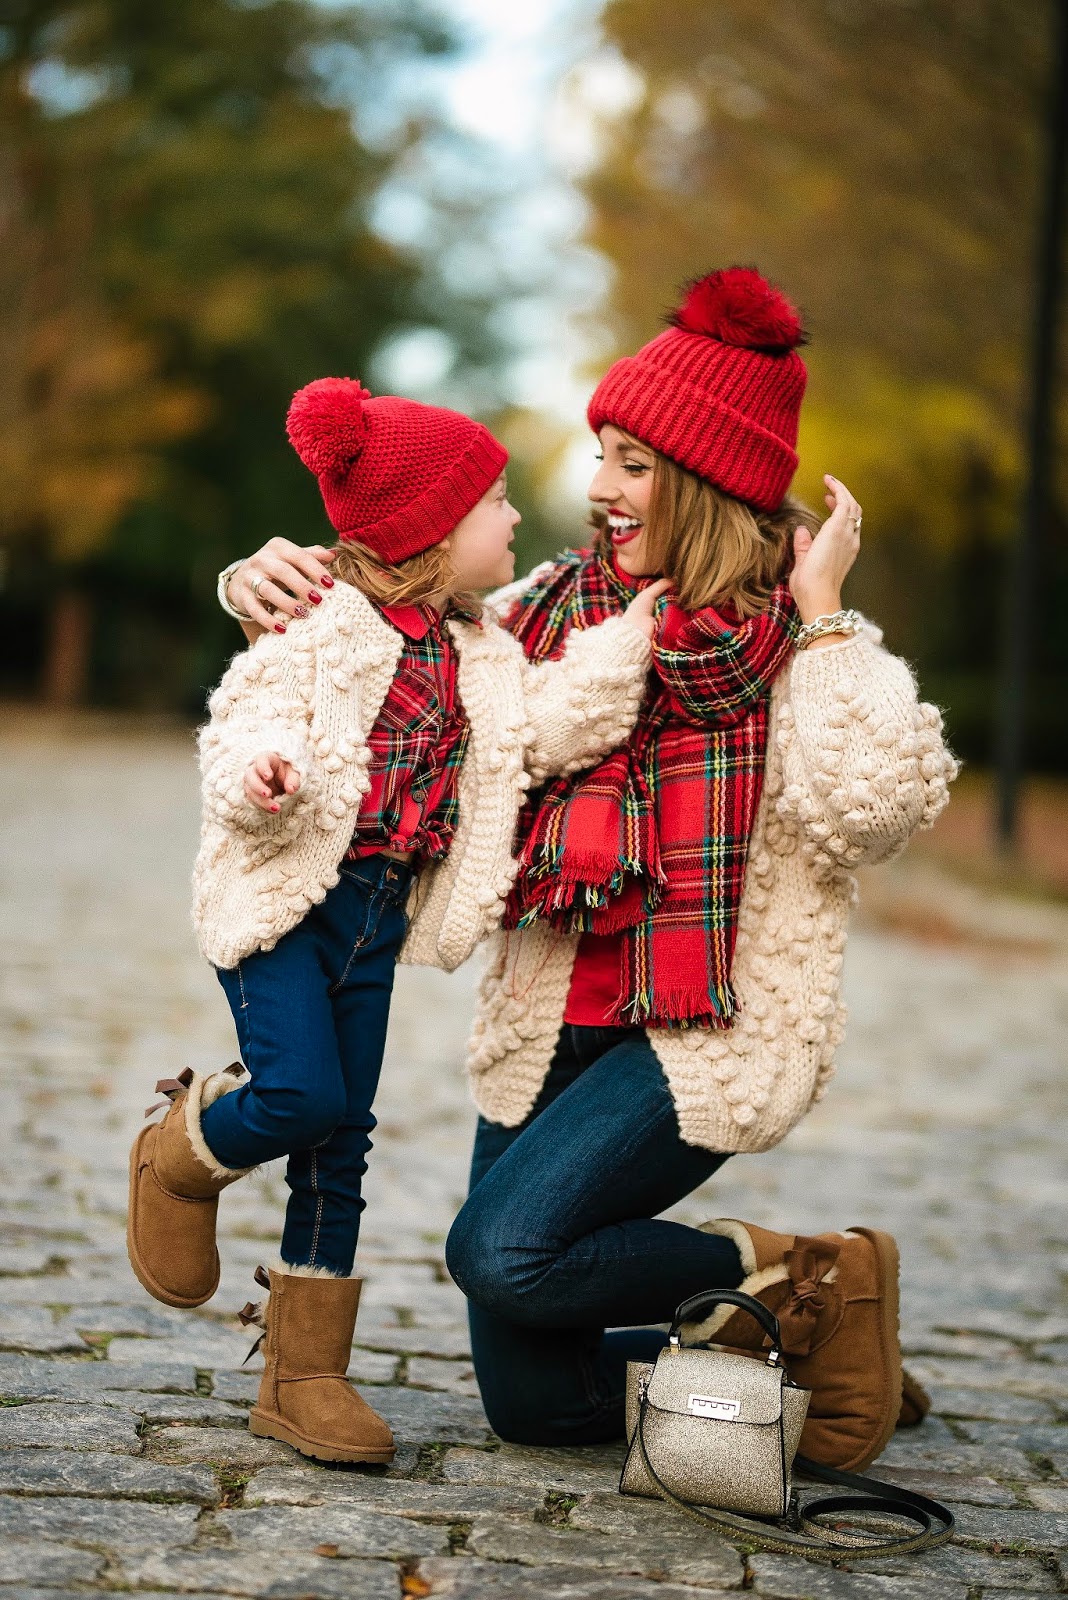 Mommy & Me in Heart Cardigans & Plaid - Something Delightful Blog